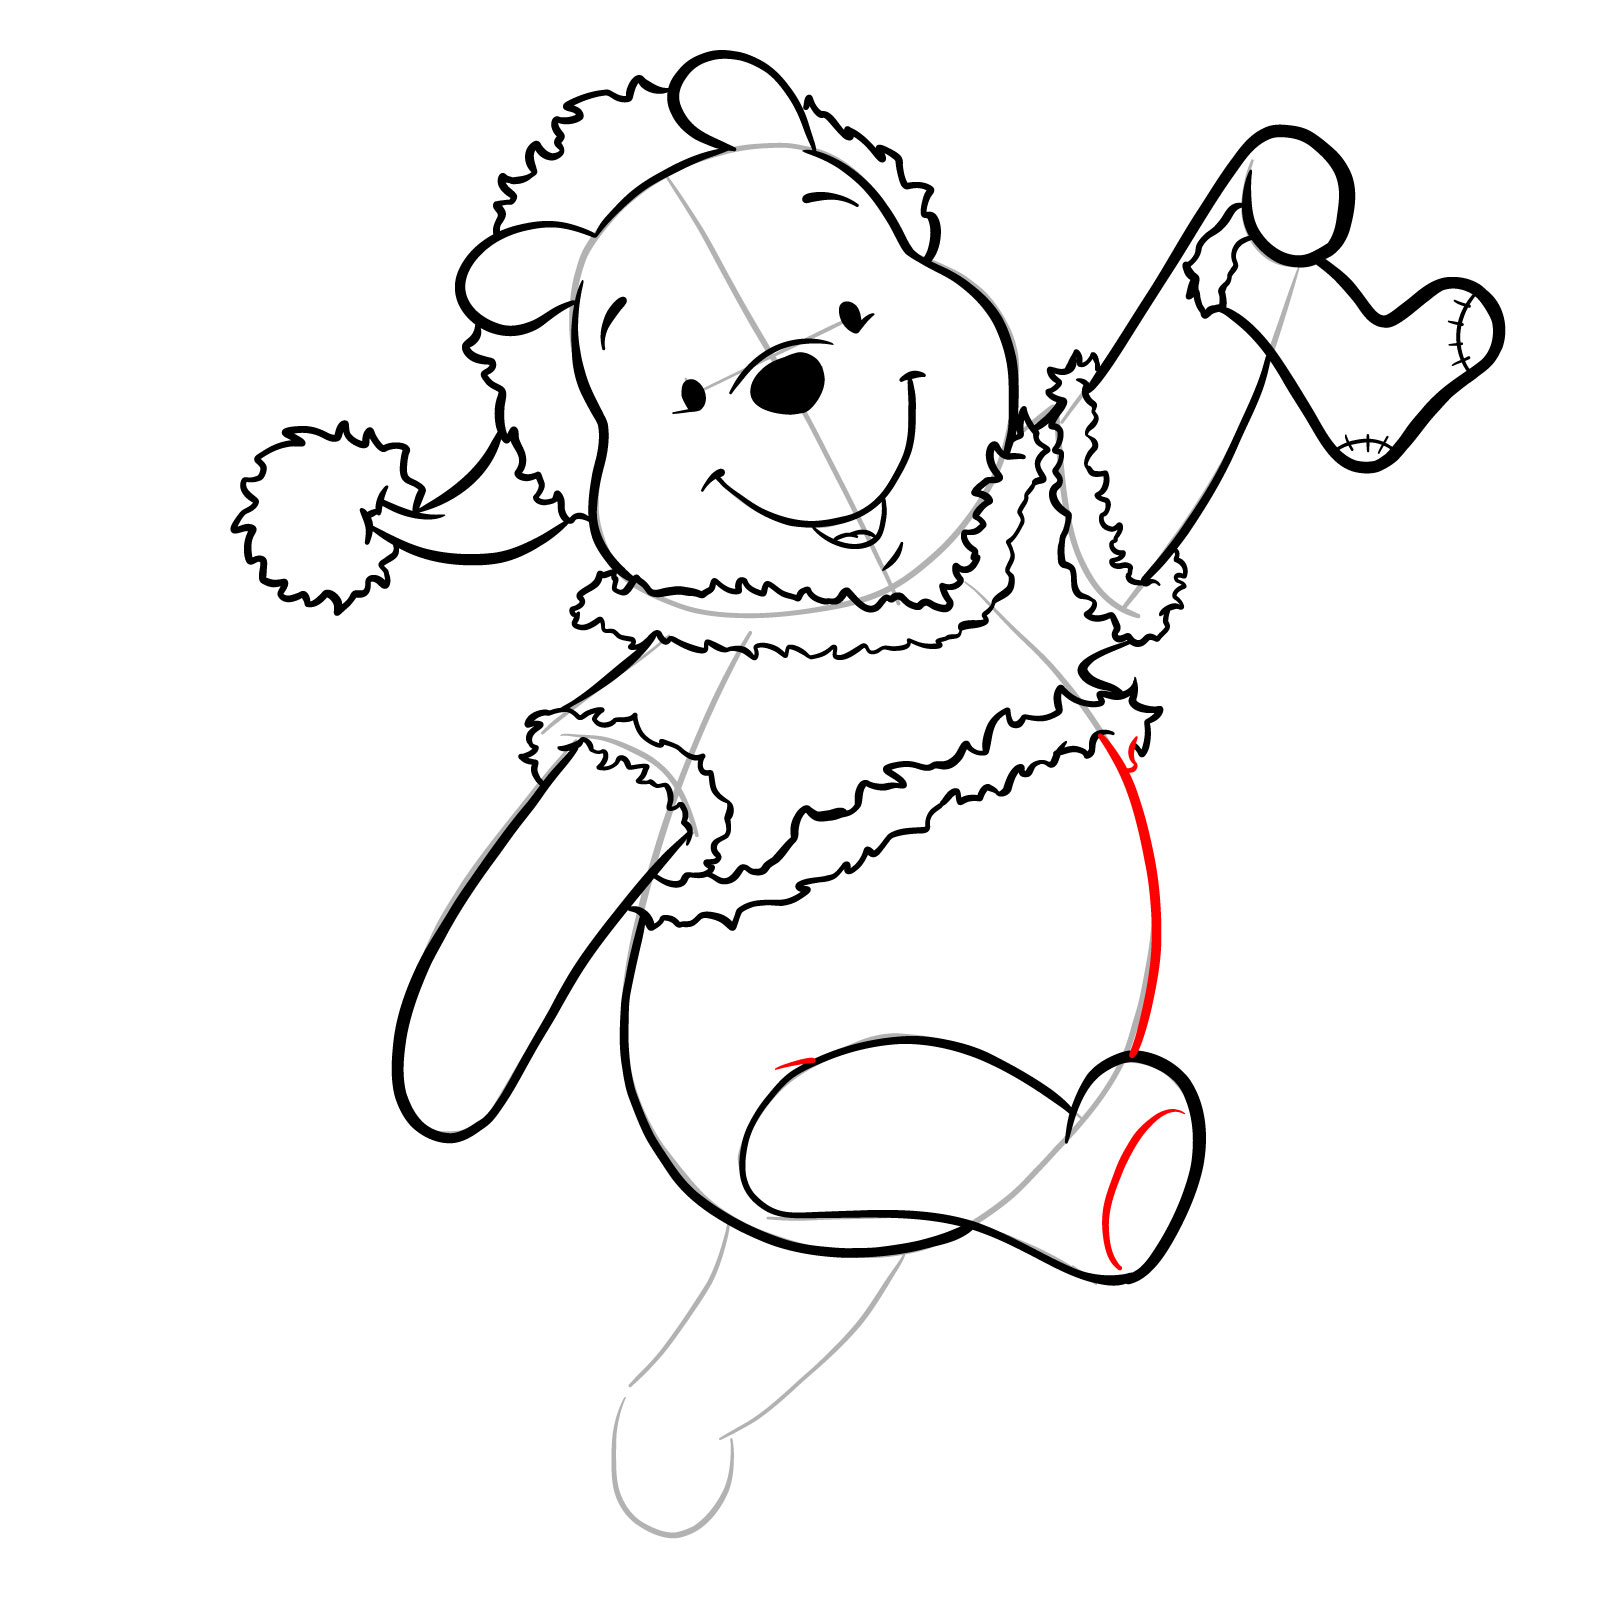 How to draw Winnie-the-Pooh Christmas style - step 25